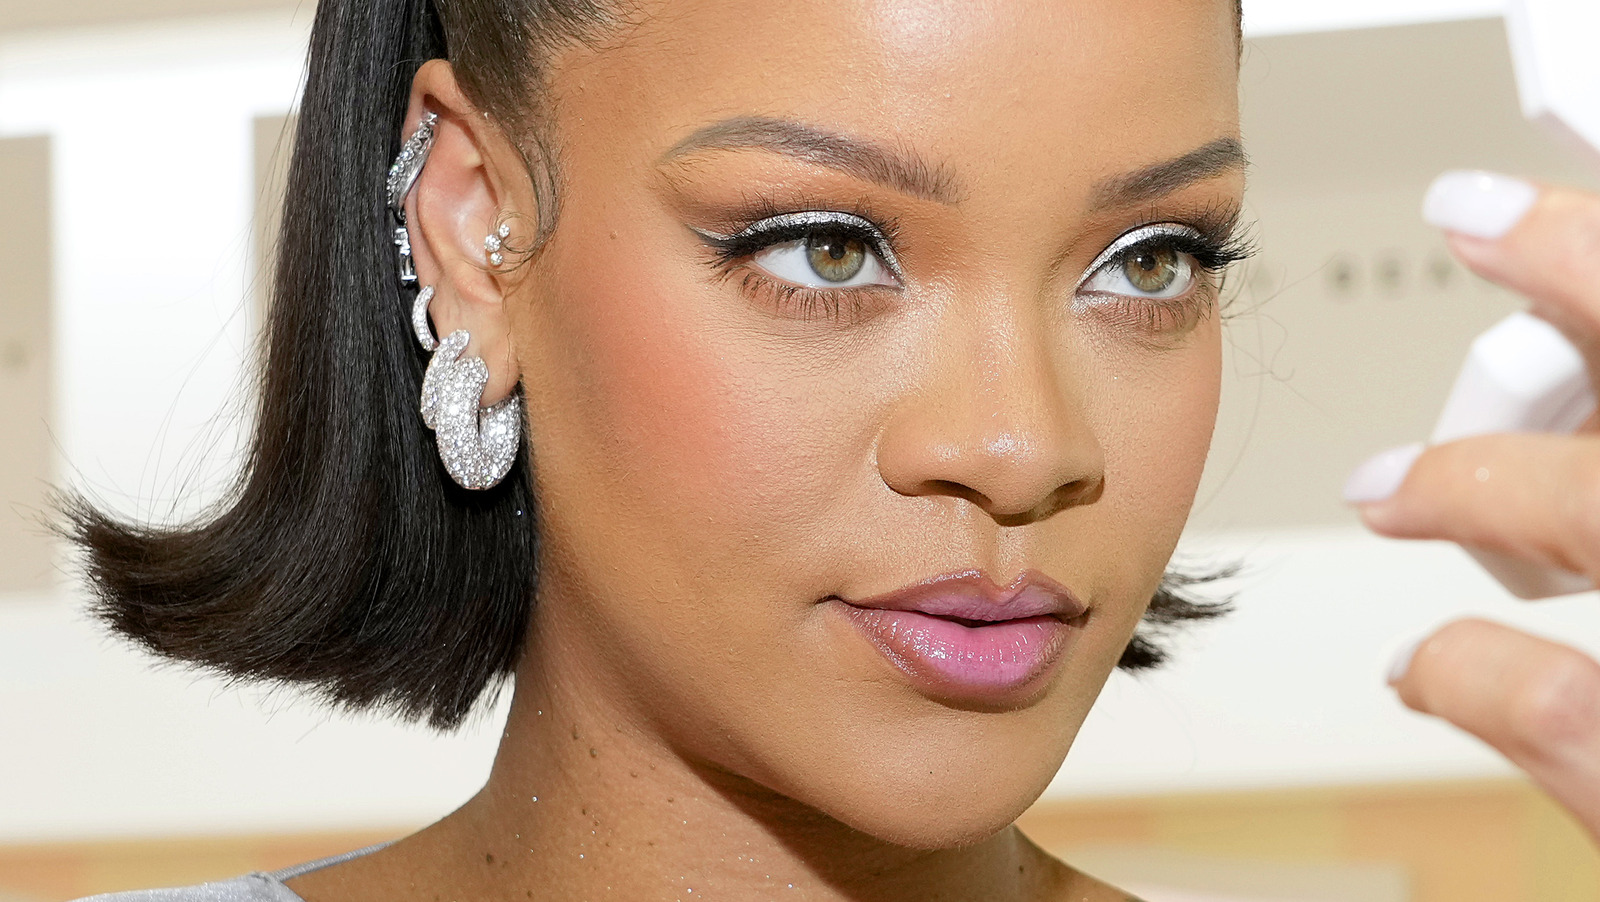 publikum hyppigt Stoop Here's What Rihanna Really Looks Like Without Makeup